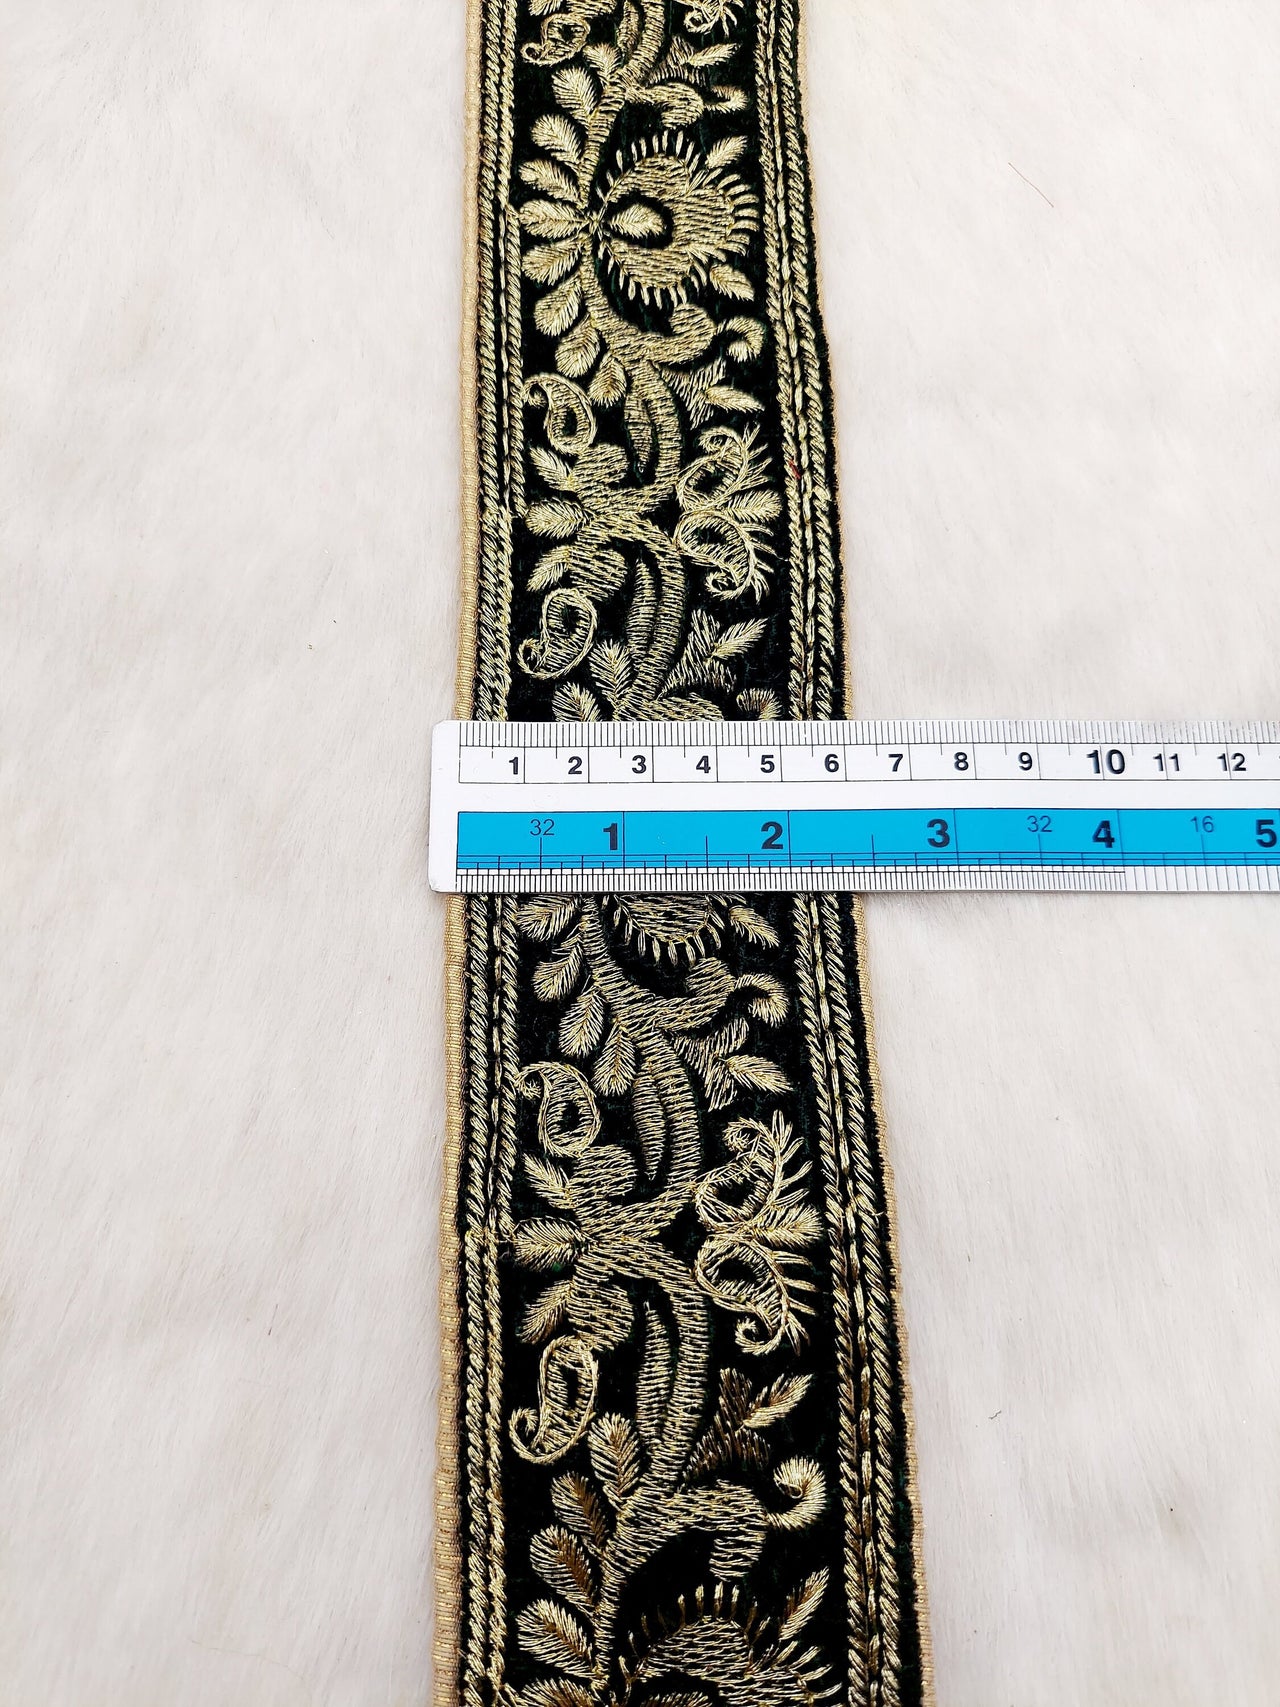 Dark Green Velvet Trim In Gold Floral Embroidery, Trim By Yard | 9 Yards, Decorative Trimming, Embroidered Trim